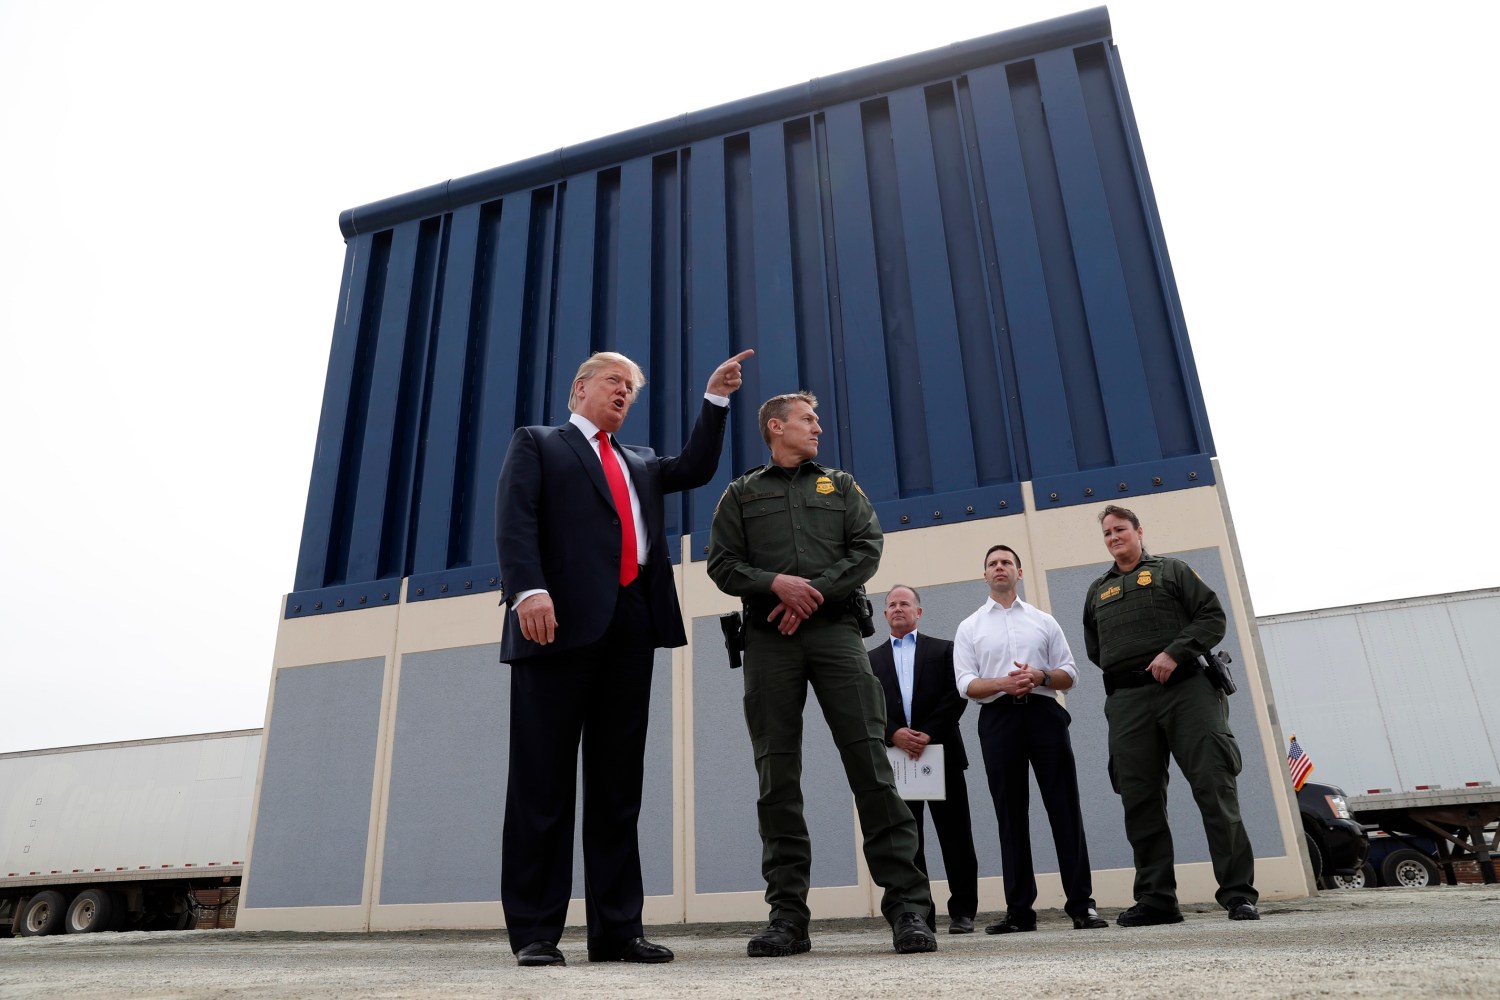 U.S. President Donald Trump talks with a U.S. Customs and Border Protection (CBP) Border Patrol Agent while participating in a tour of U.S.-Mexico border wall prototypes near the Otay Mesa Port of Entry in San Diego, California. U.S., March 13, 2018. REUTERS/Kevin Lamarque - HP1EE3D1KSH5O